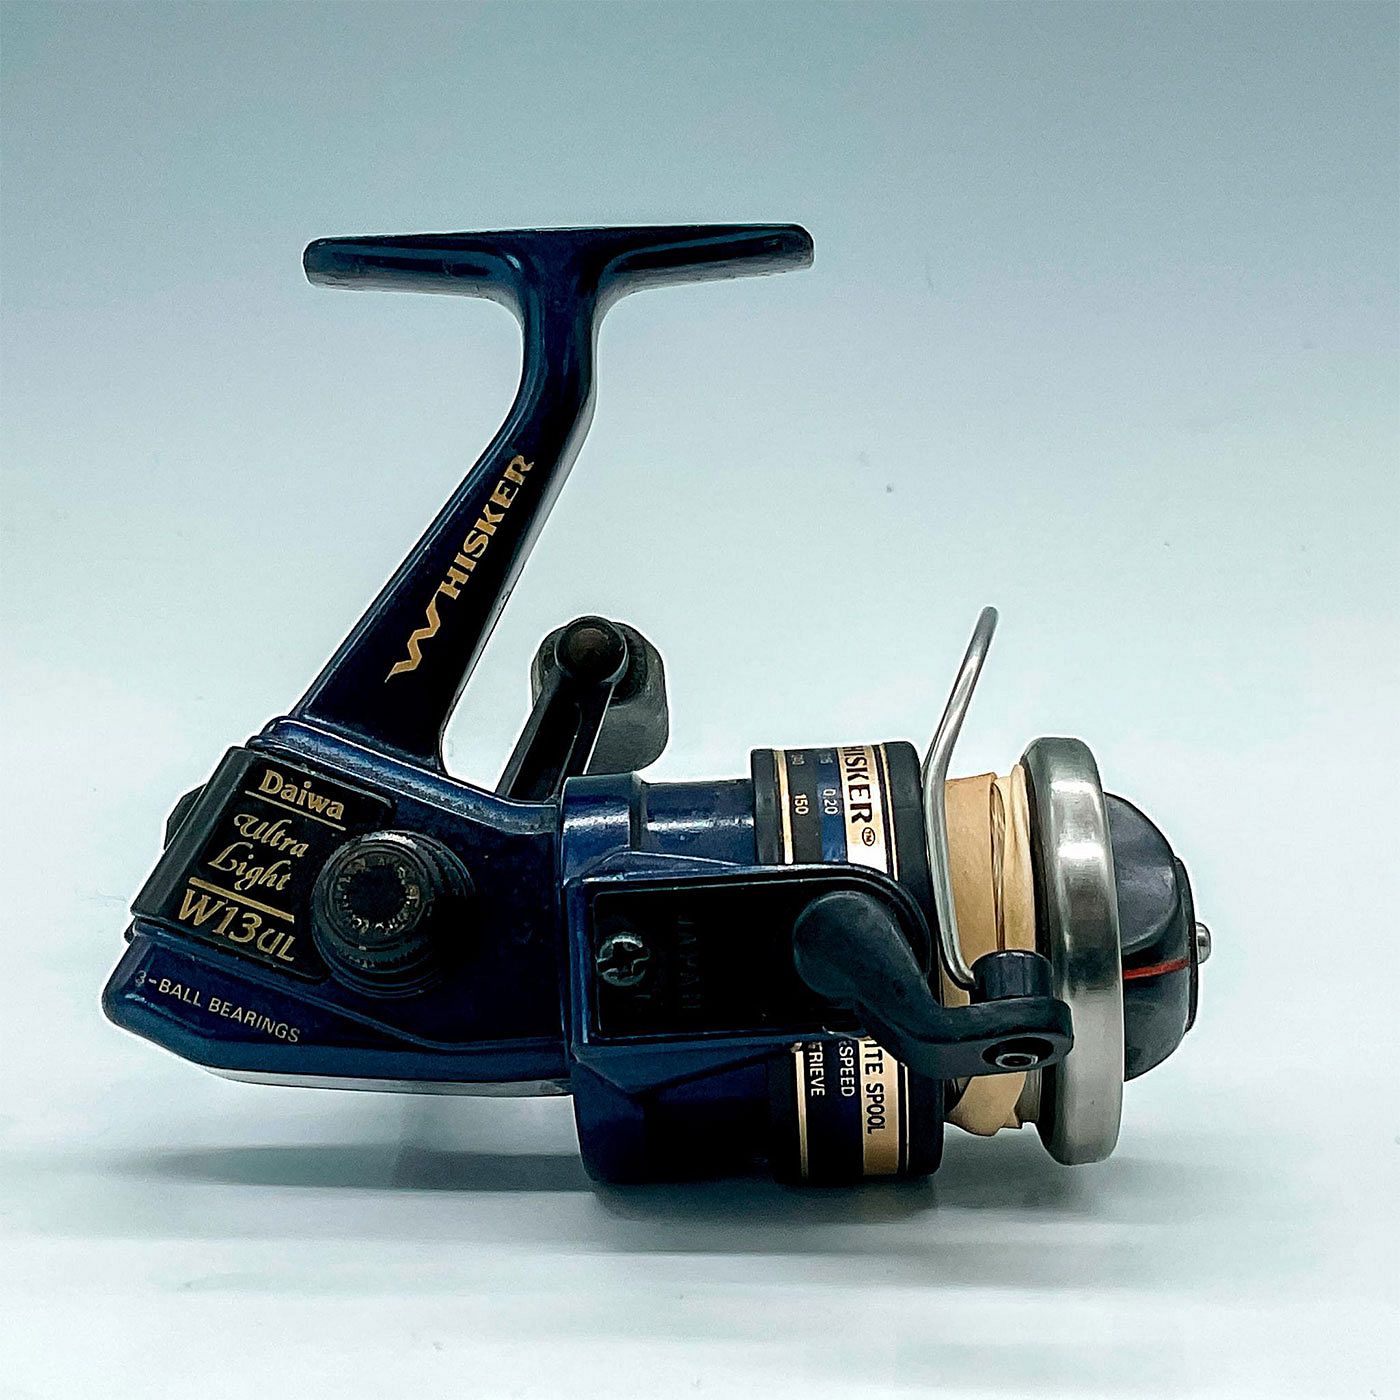 Vintage Daiwa Whisker Ultralight Spinning Reel W13UL sold at auction on 9th  August, old daiwa spinning reels 